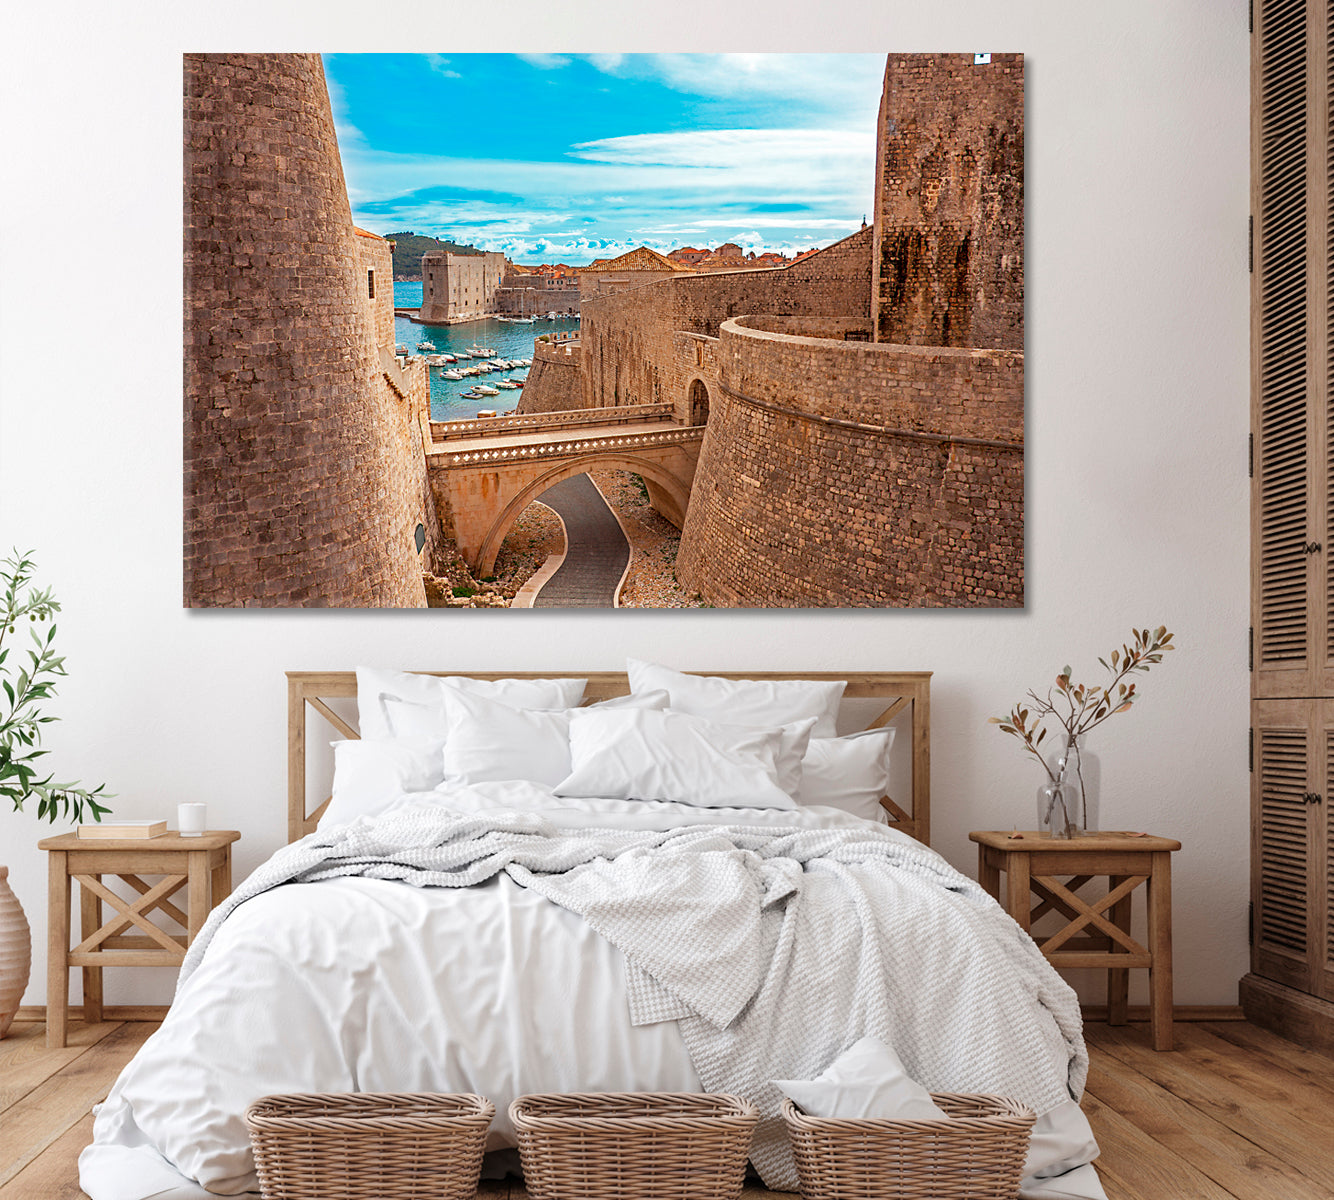 Dubrovnik Old Town Croatia Canvas Print ArtLexy 1 Panel 24"x16" inches 